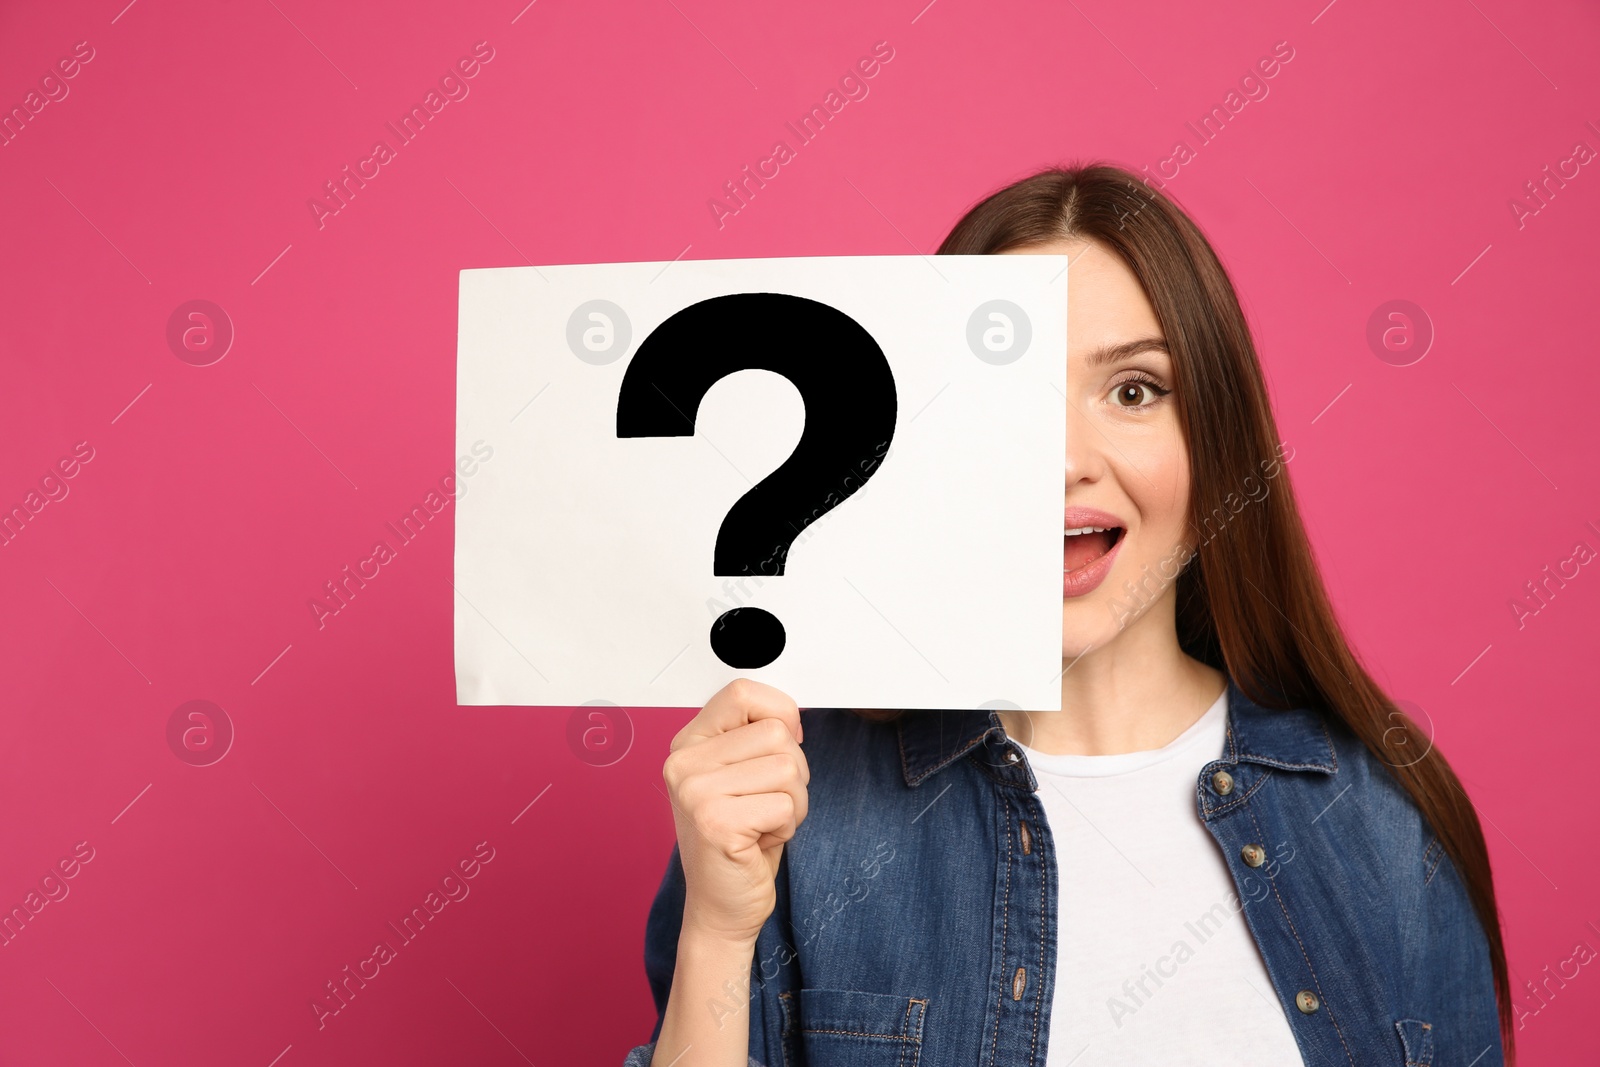 Photo of Emotional woman holding question mark sign on pink background